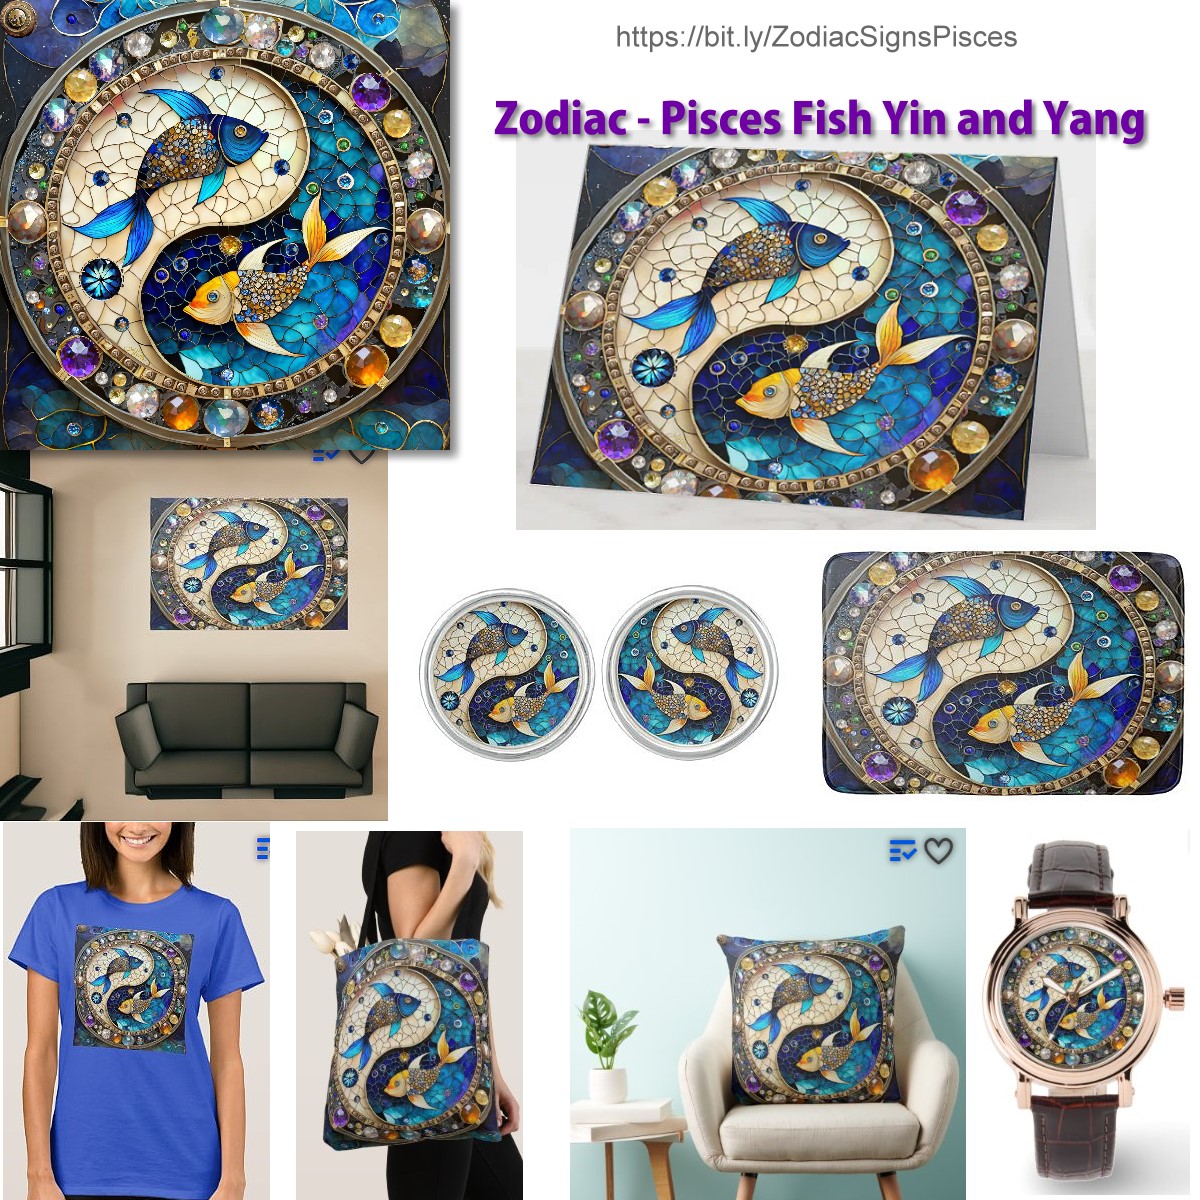 ✨♓️☯️♓️✨ Zodiac Gift Shop for Astrology Sign Pisces #astrology #Pisces #Horoscope #zodiac #gifts #zodiacsigns #watches #pillows #Cufflinks #totebag #greetingcards #GreetingCard #rug #bathmat Pisces Horoscope bit.ly/ZodiacSignsPis…